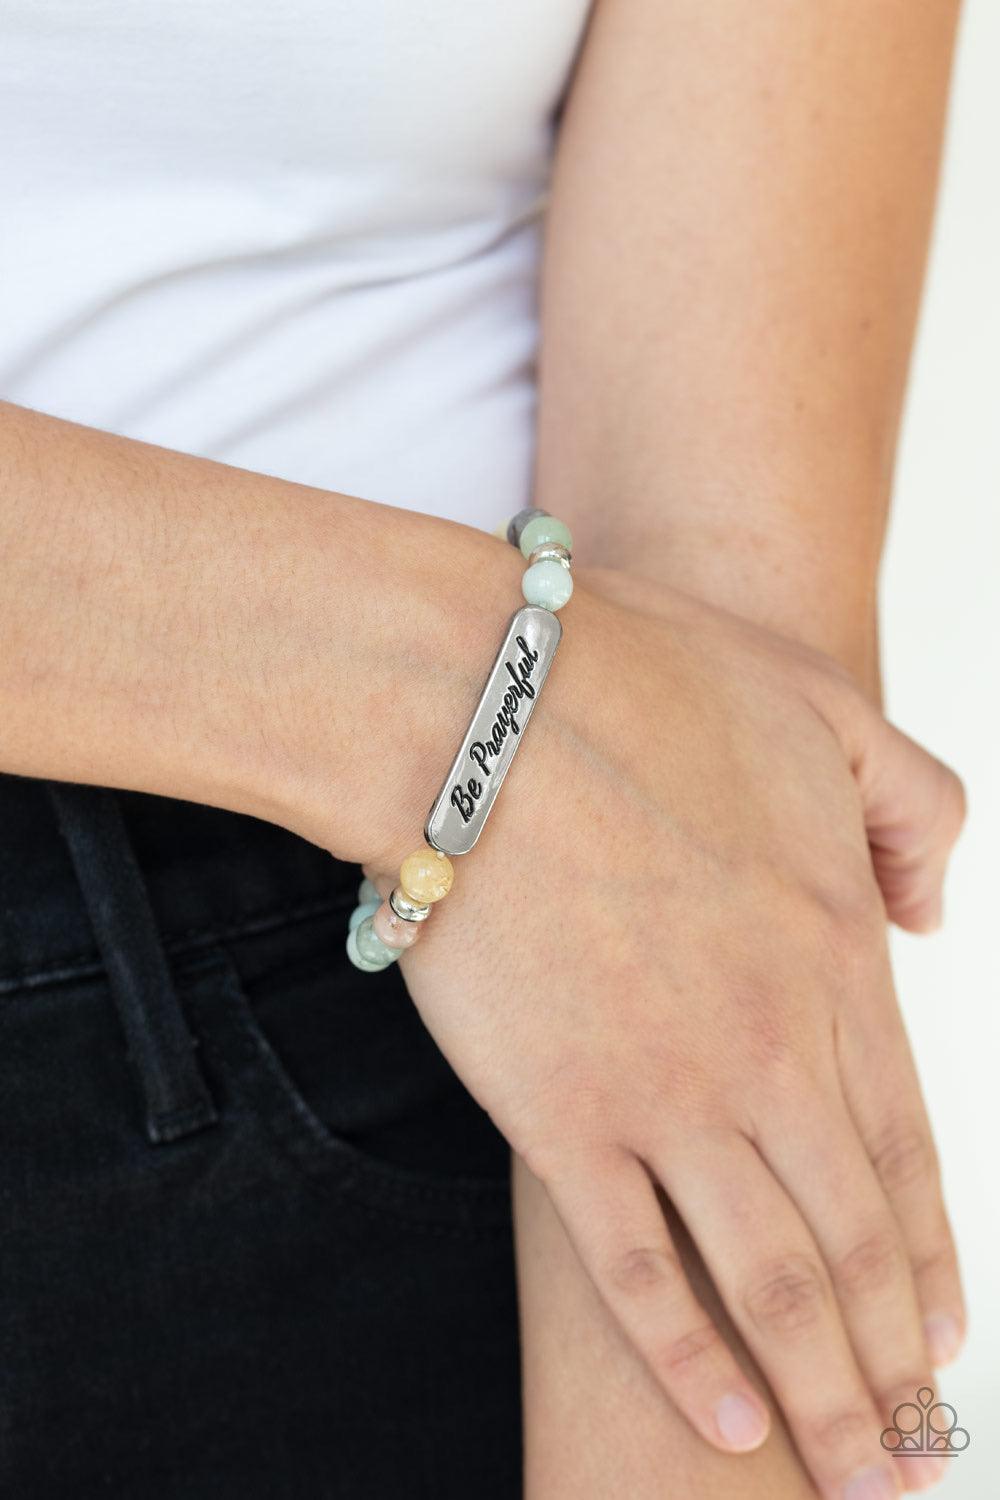 Paparazzi Accessories Be Prayerful - Green Infused with dainty silver accents, a collection of glassy stone beads and a shimmery silver frame stamped in the phrase, "Be Prayerful", are threaded along a stretchy band around the wrist for an inspirational l